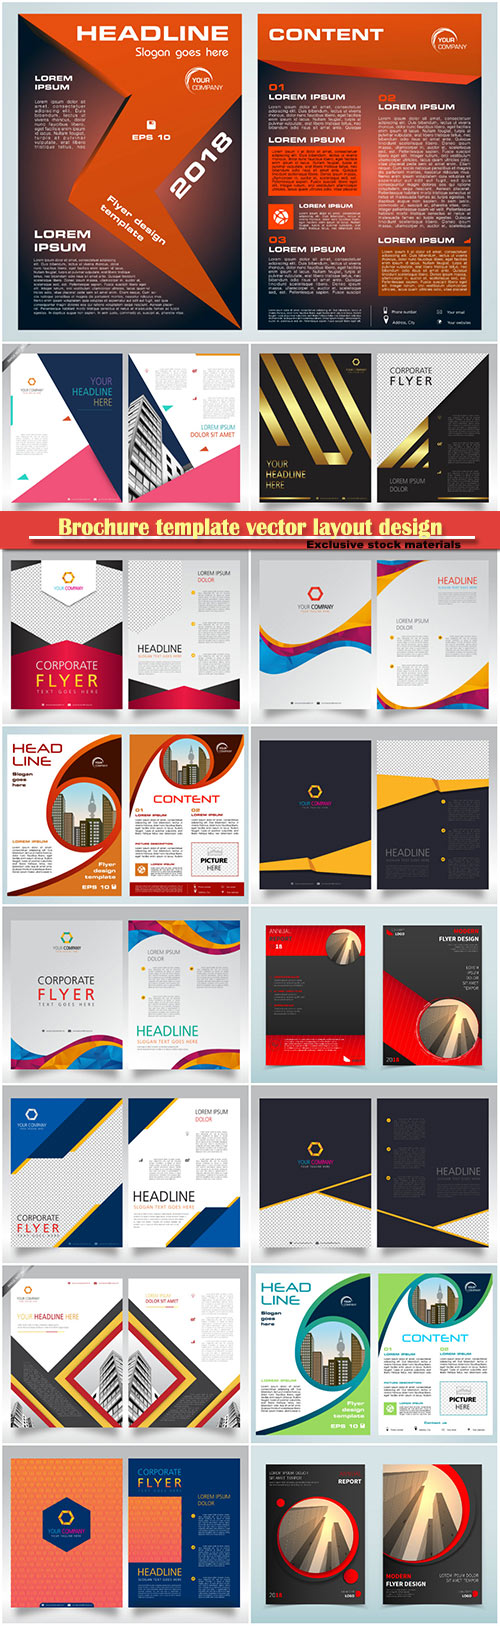 Brochure template vector layout design, corporate business annual report, magazine, flyer mockup # 113